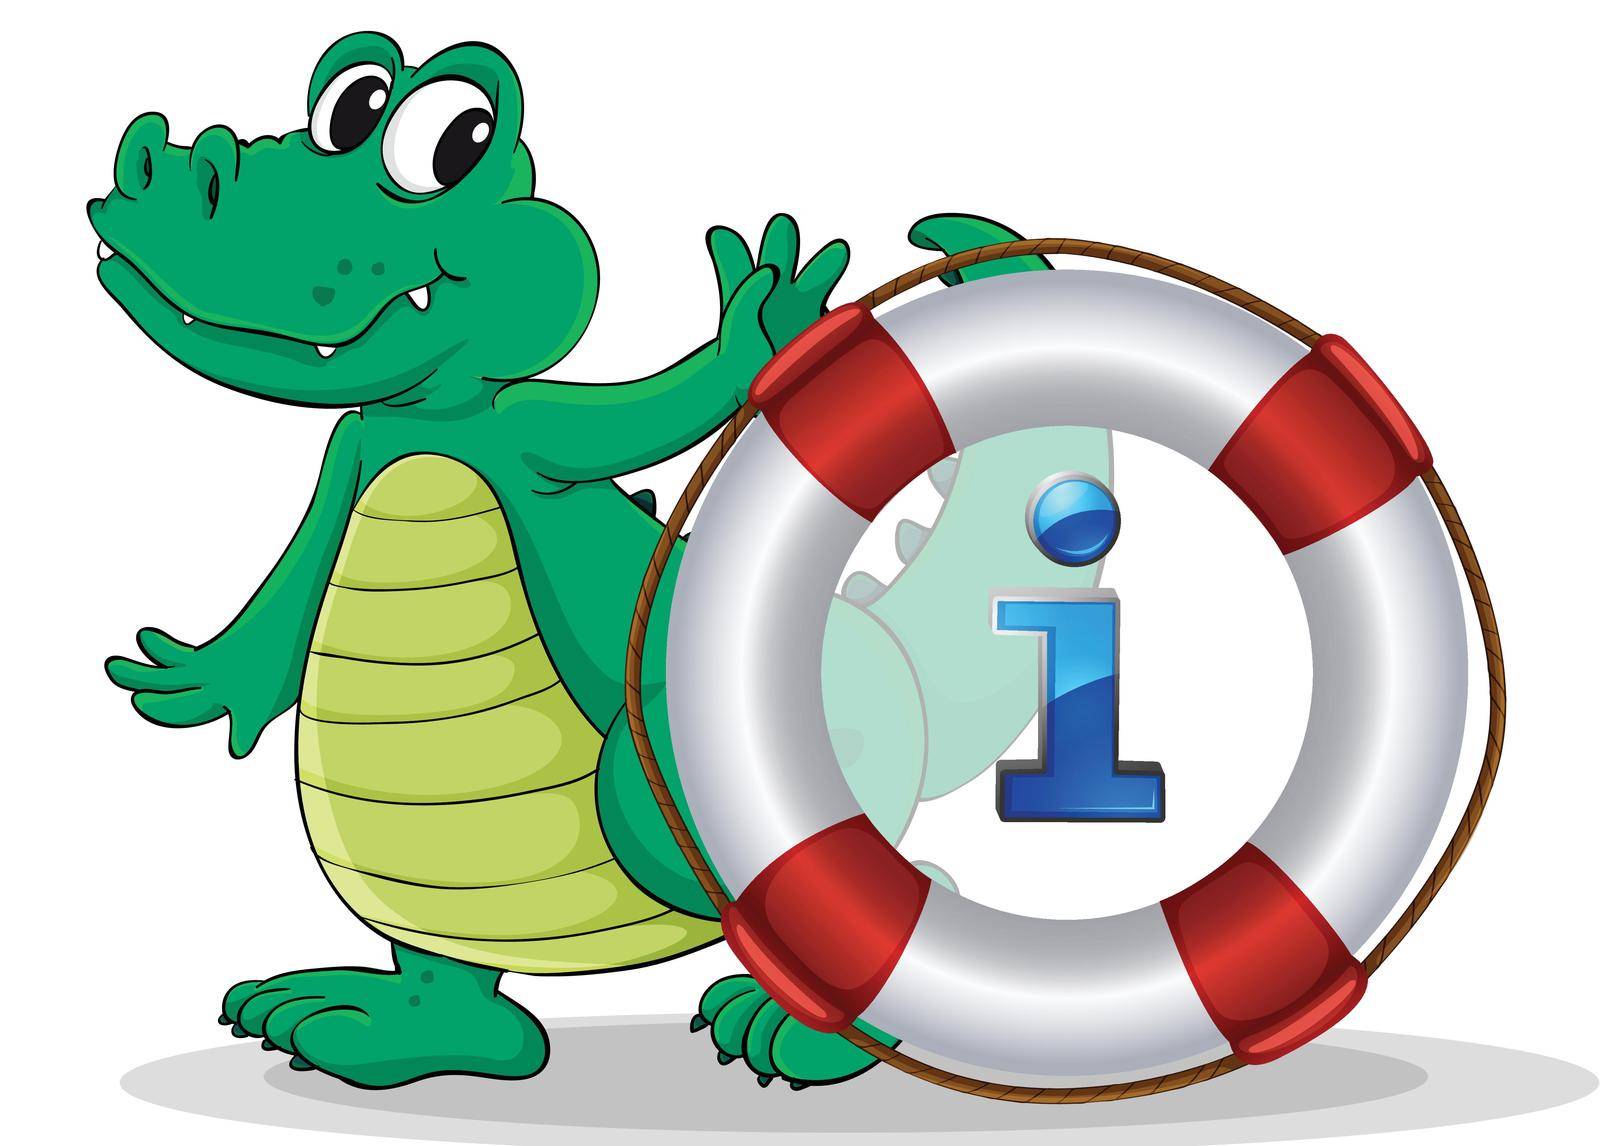 Illustration of a cartoon character and an information icon